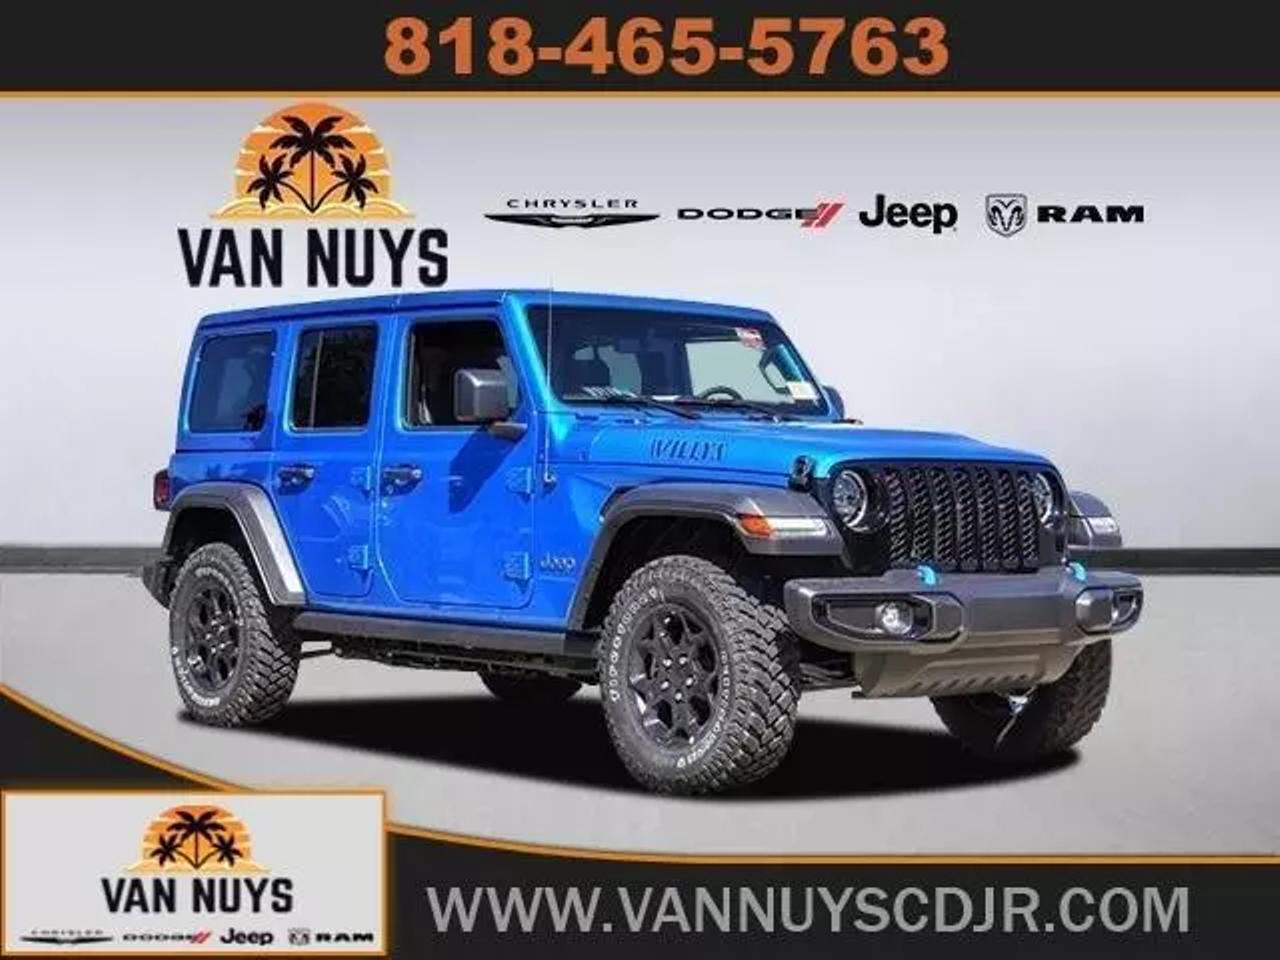 Used Jeep Wrangler 4xe Hybrid in Hydro Blue Pearlcoat For Sale: Check  Photos, Prices And Dealers Near Me | CarBuzz